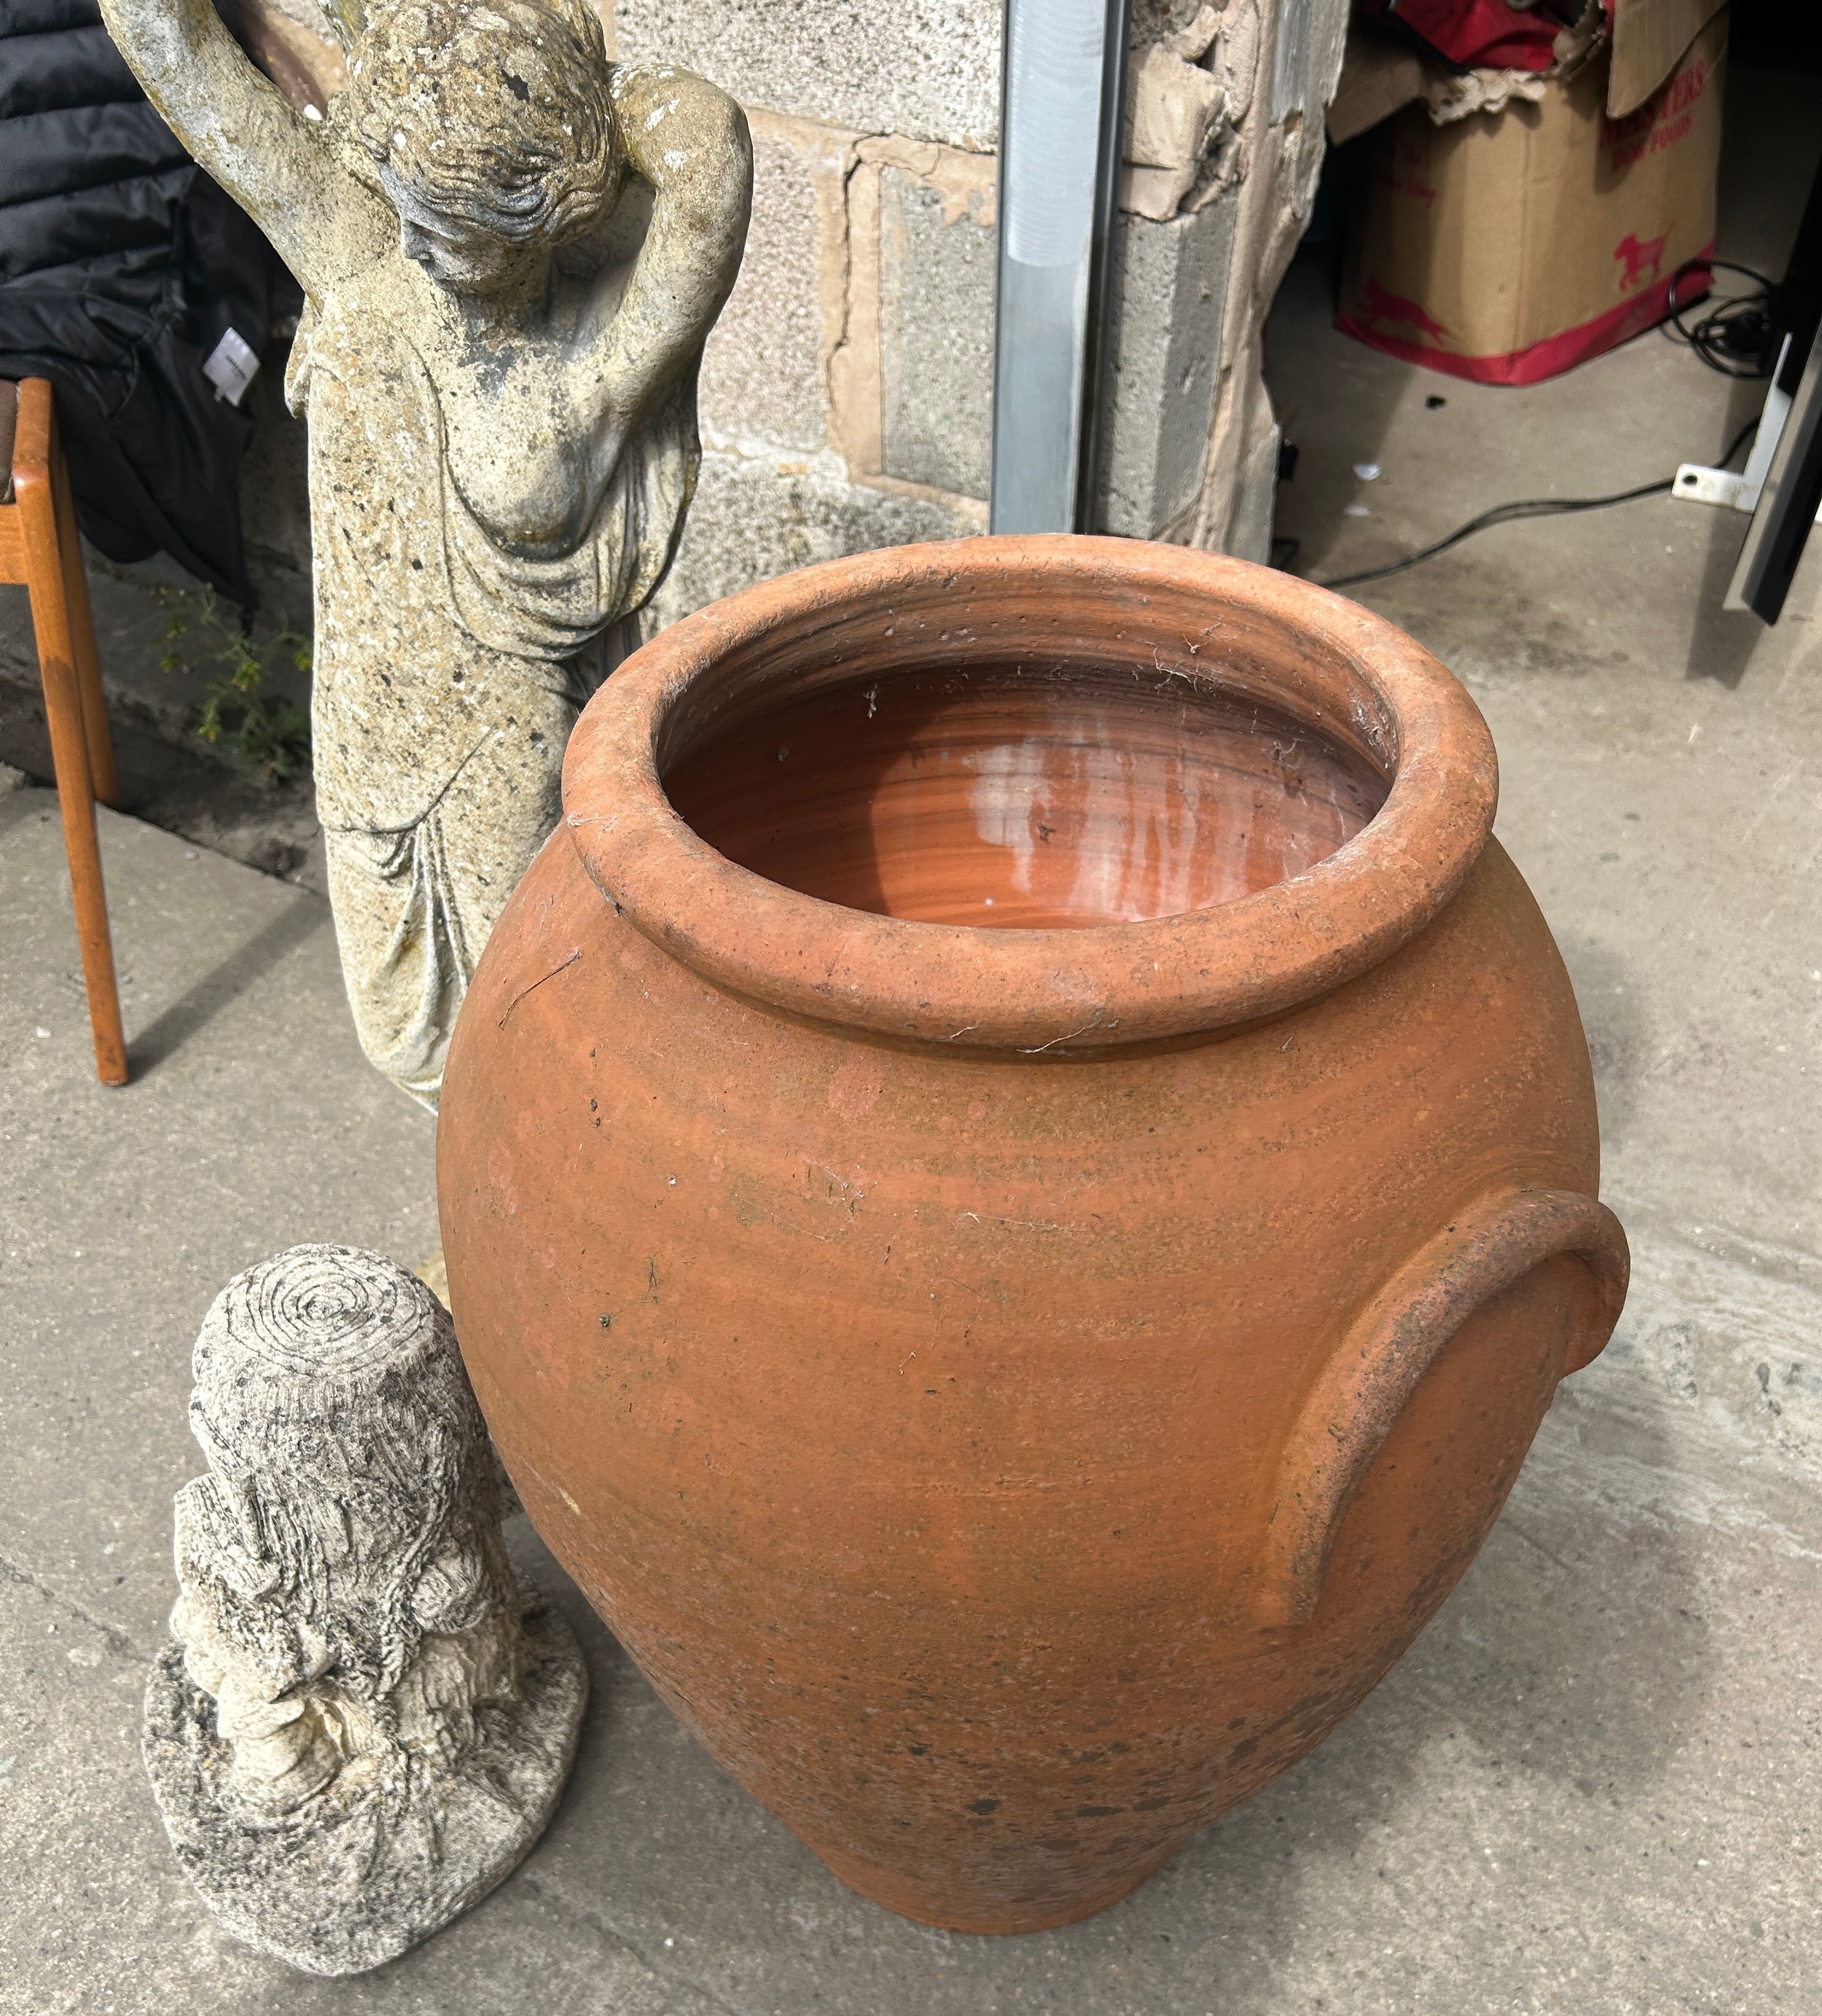 Large terracotta plant pot and two concrete ornaments - tallest measures approx 36 inches tall - Image 2 of 4